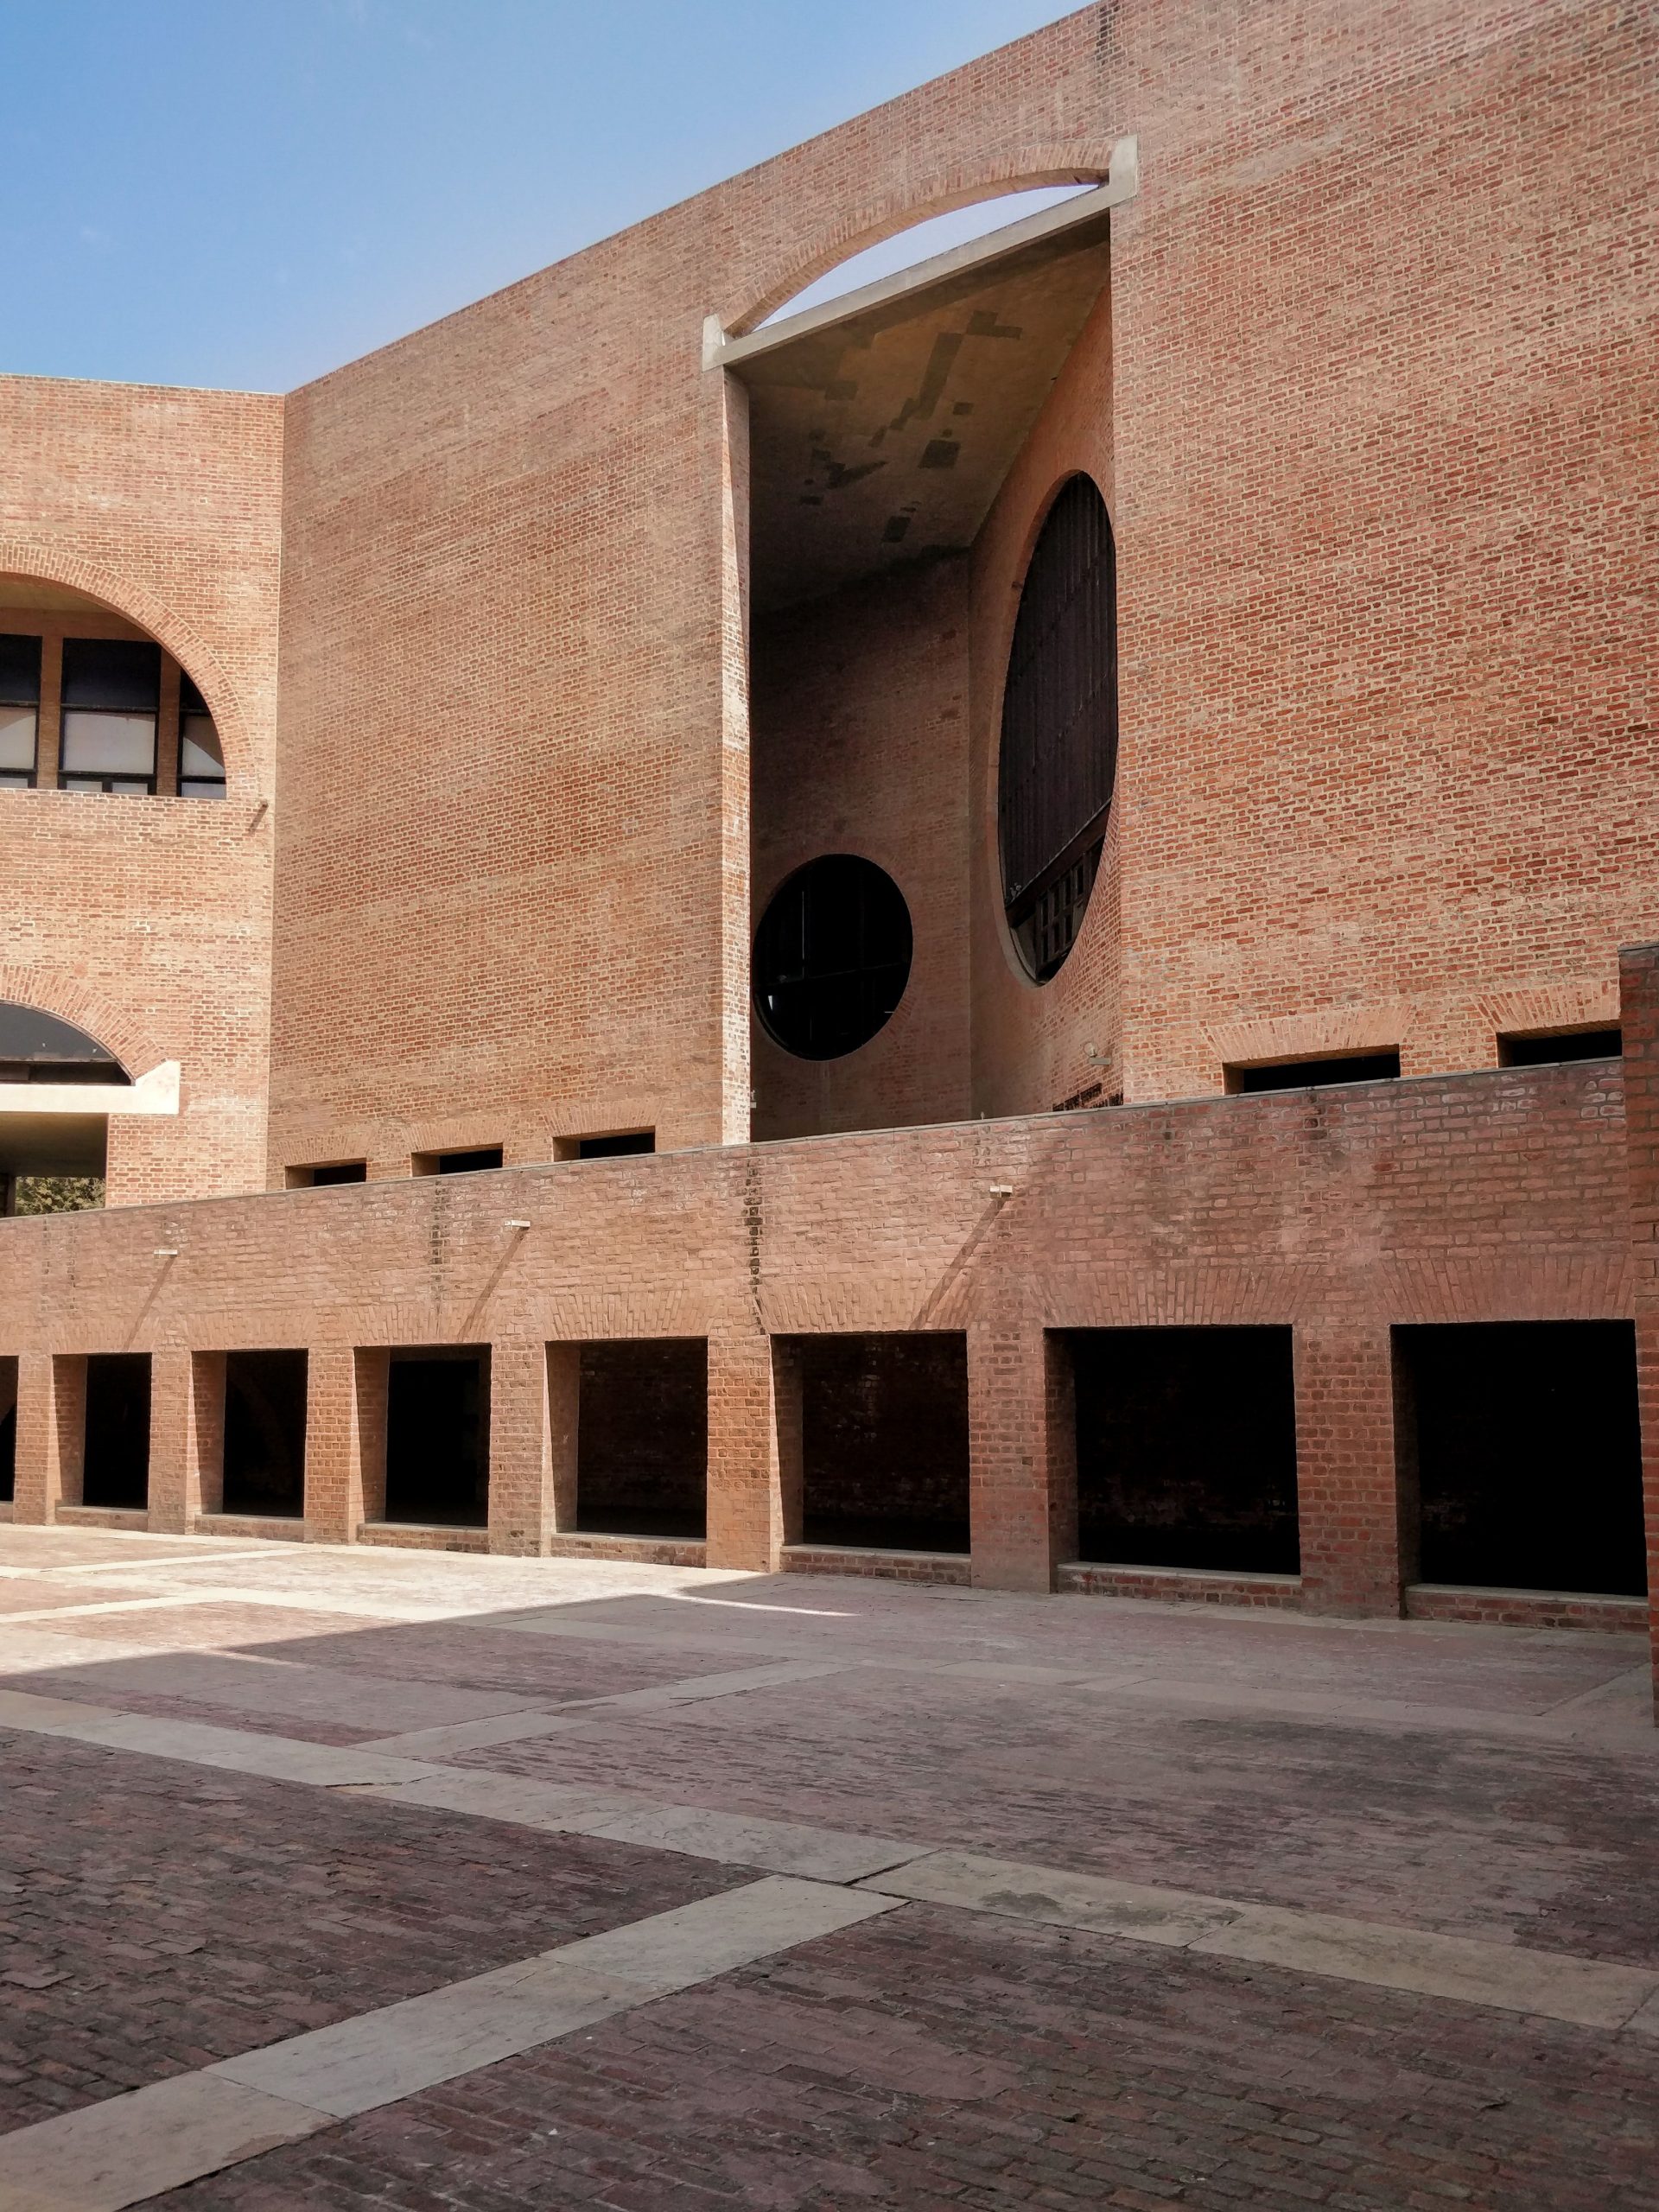 Controversy%20sparked%20over%20tearing%20down%20of%20a%20heritage%20building%20in%20IIM%20Ahmedabad